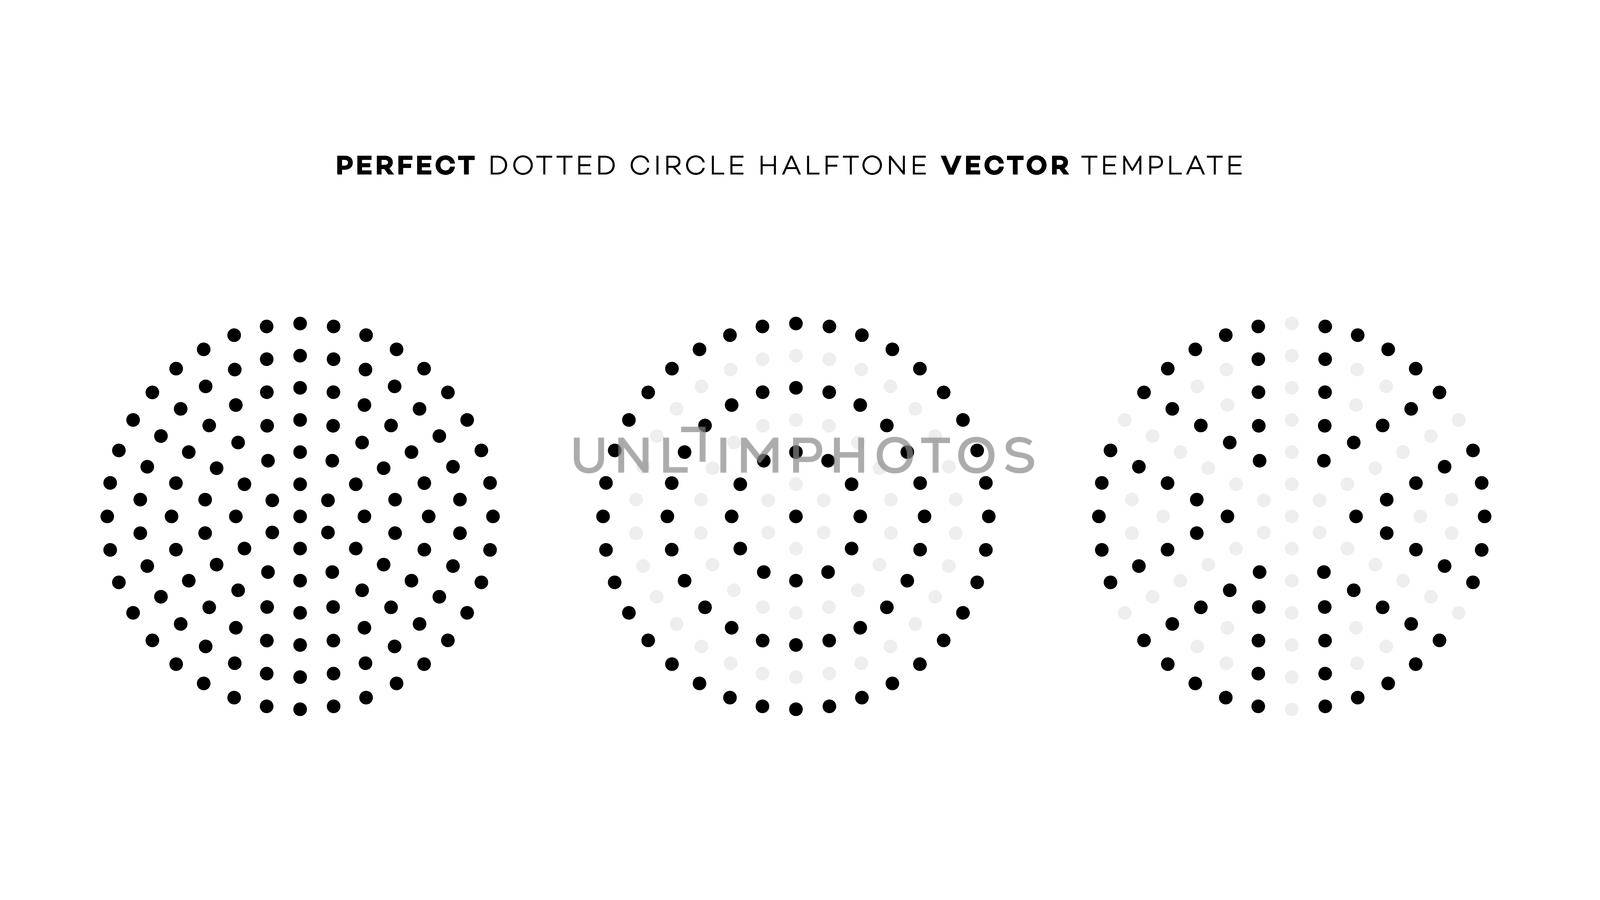 Vector geometric perfect dotted halftone circle. Vector design element. Overlay texture. Branding element.